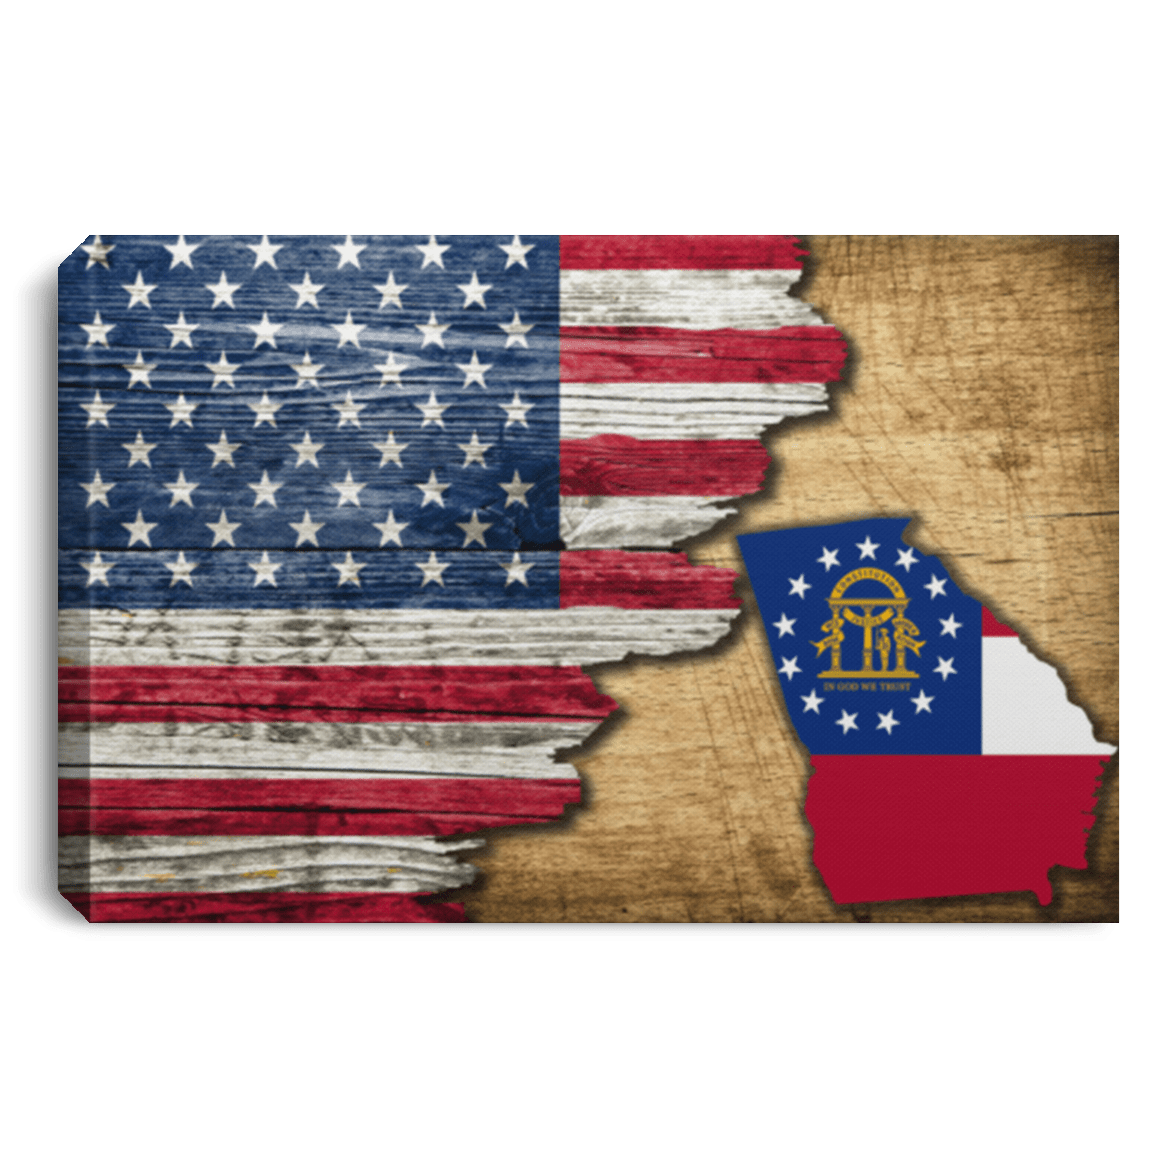 United States/Georgia Flag Ripped Effect 18X12 Inches Landscape Canvas .75In Frame